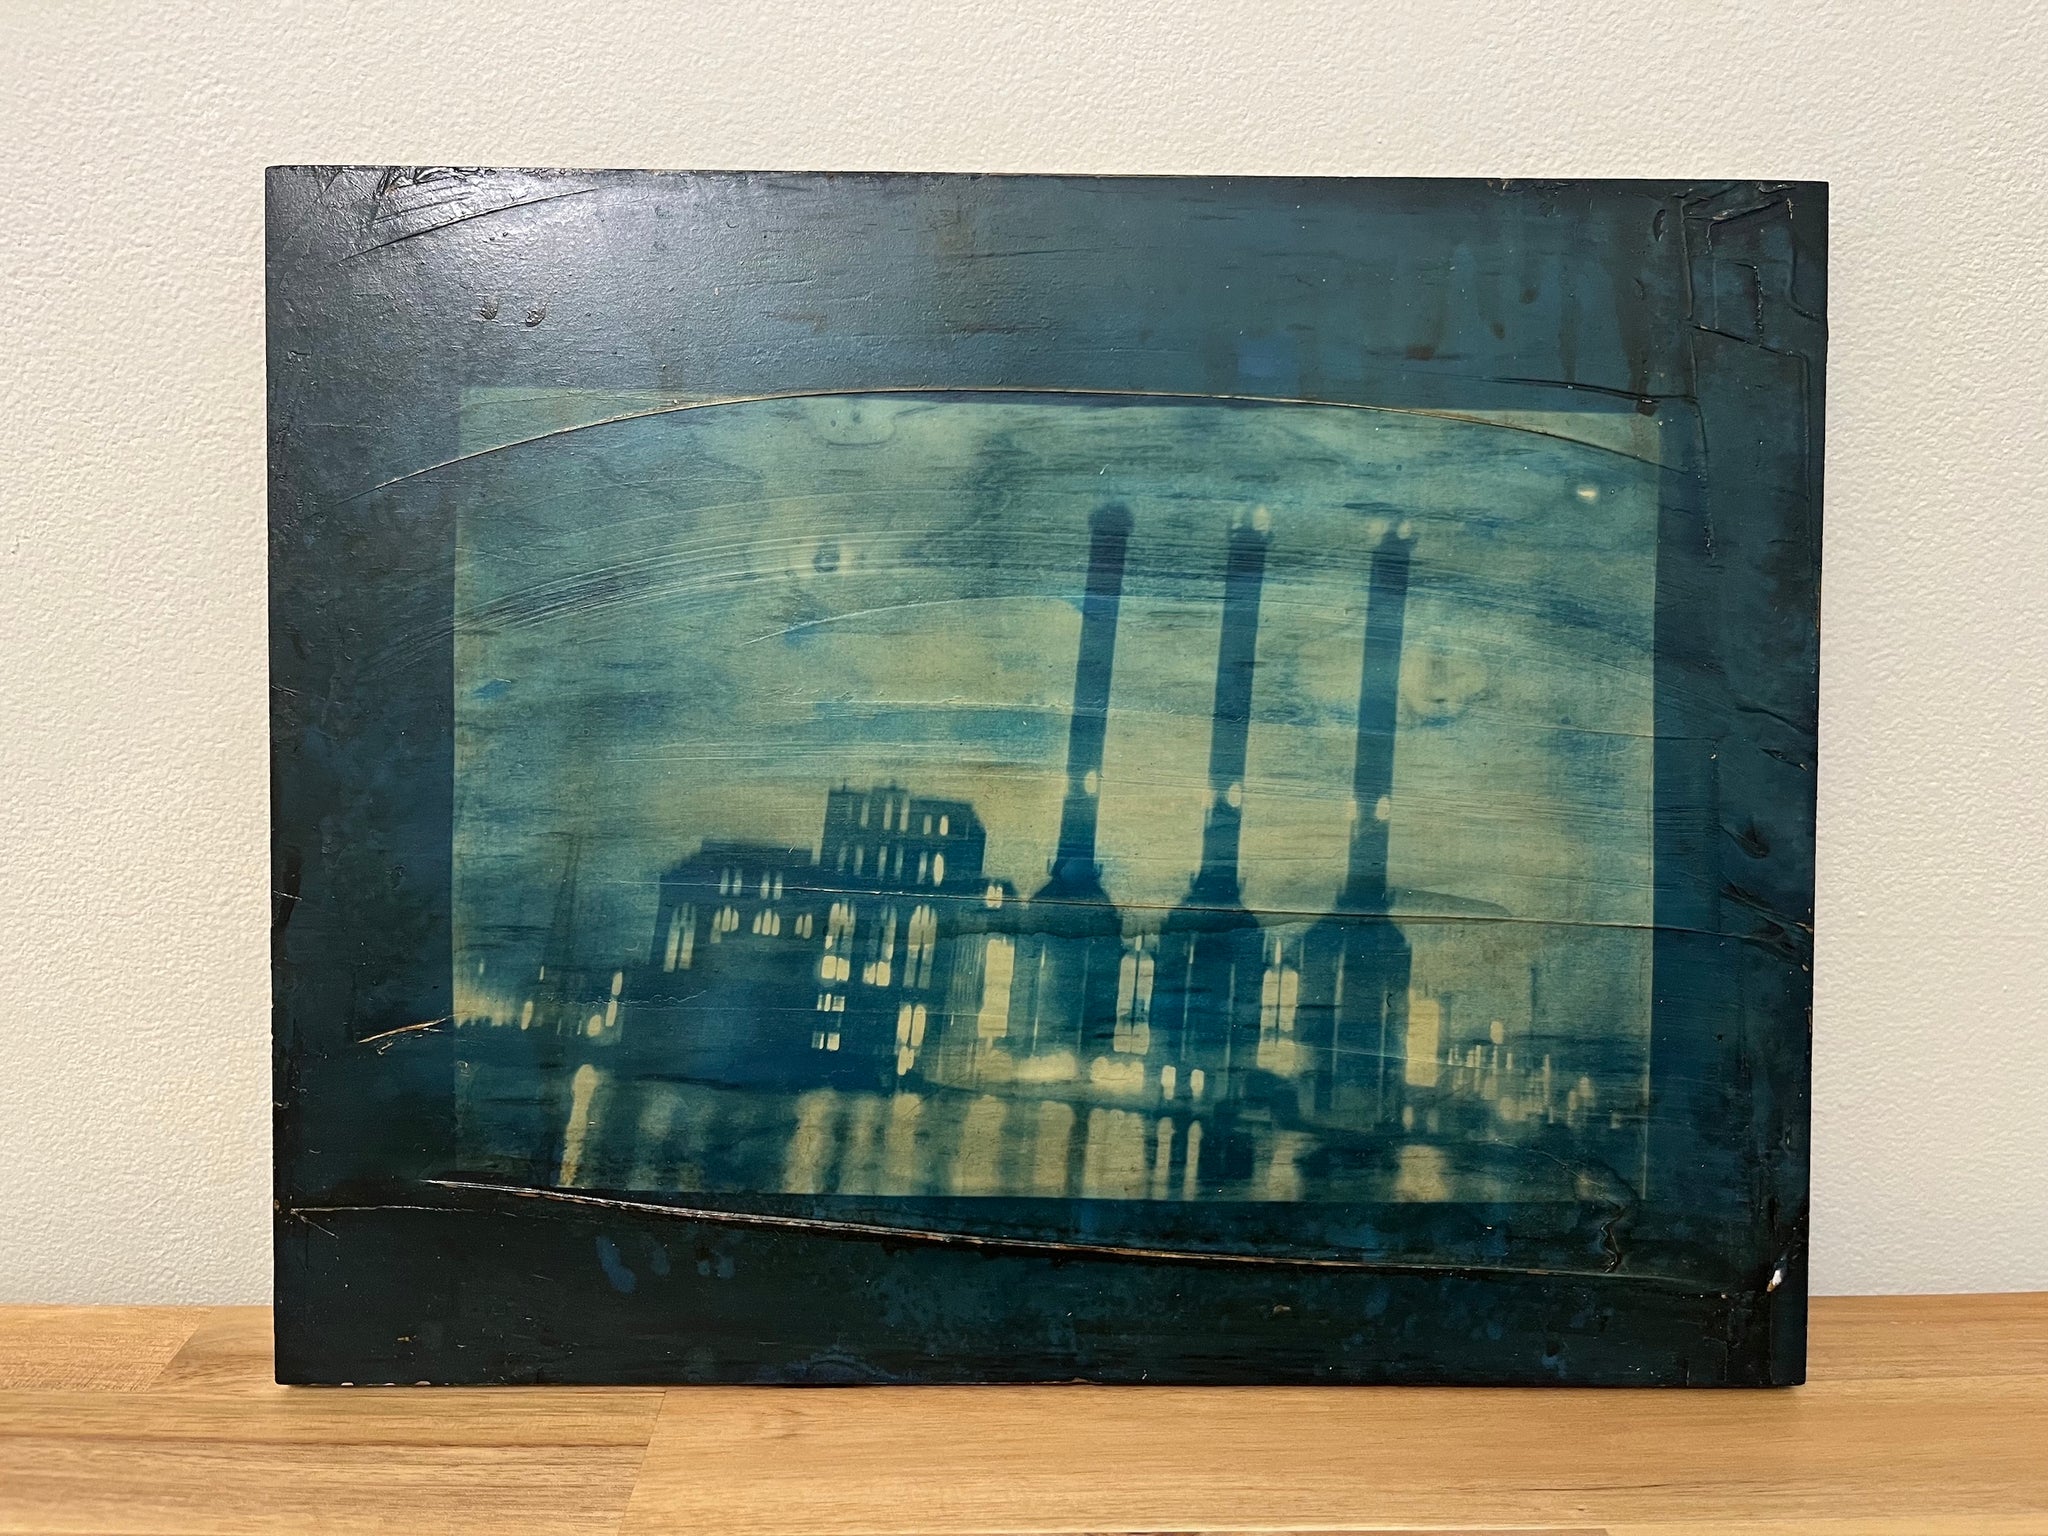 Jo Andres, "Factory View"